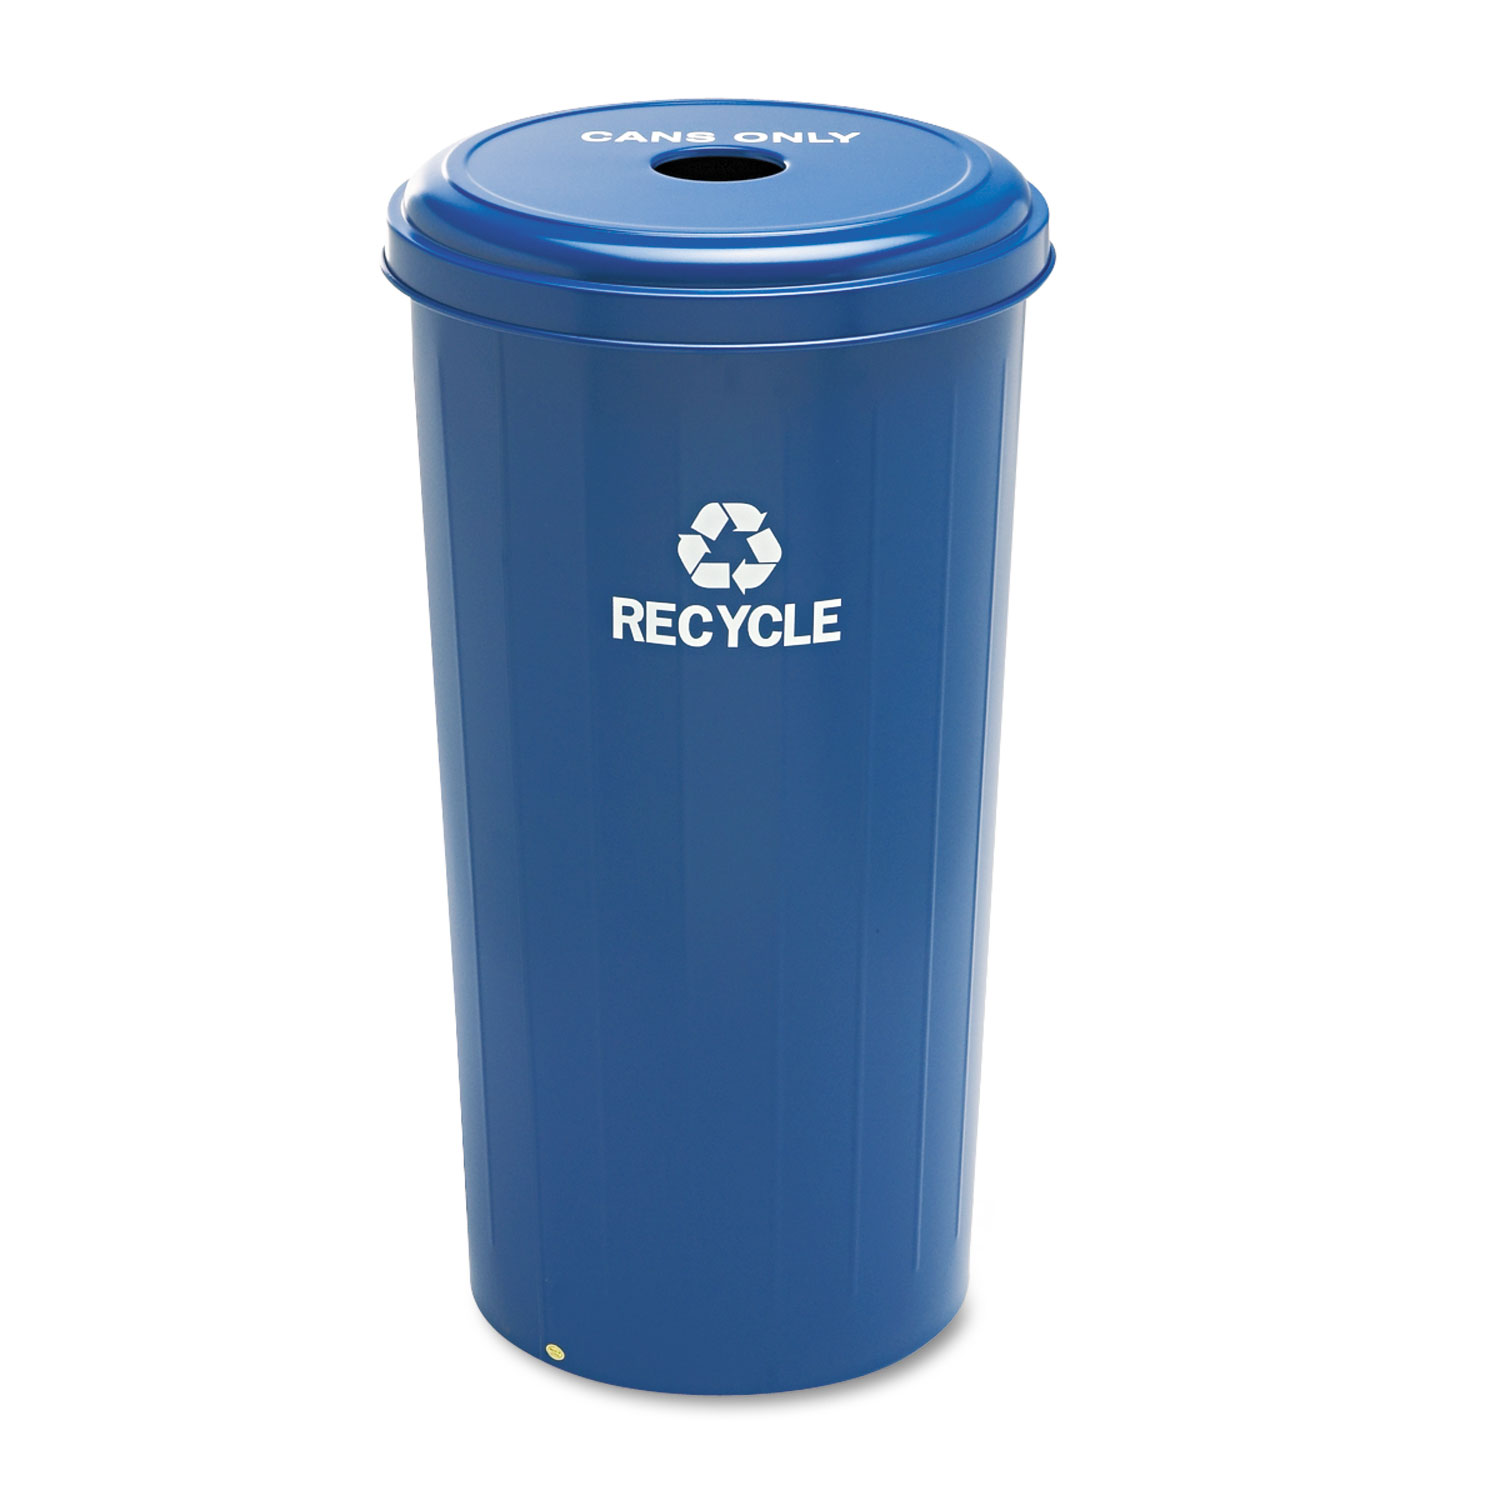  Safco 9632BU Tall Recycling Receptacle for Cans, Round, Steel, 20 gal, Recycling Blue (SAF9632BU) 